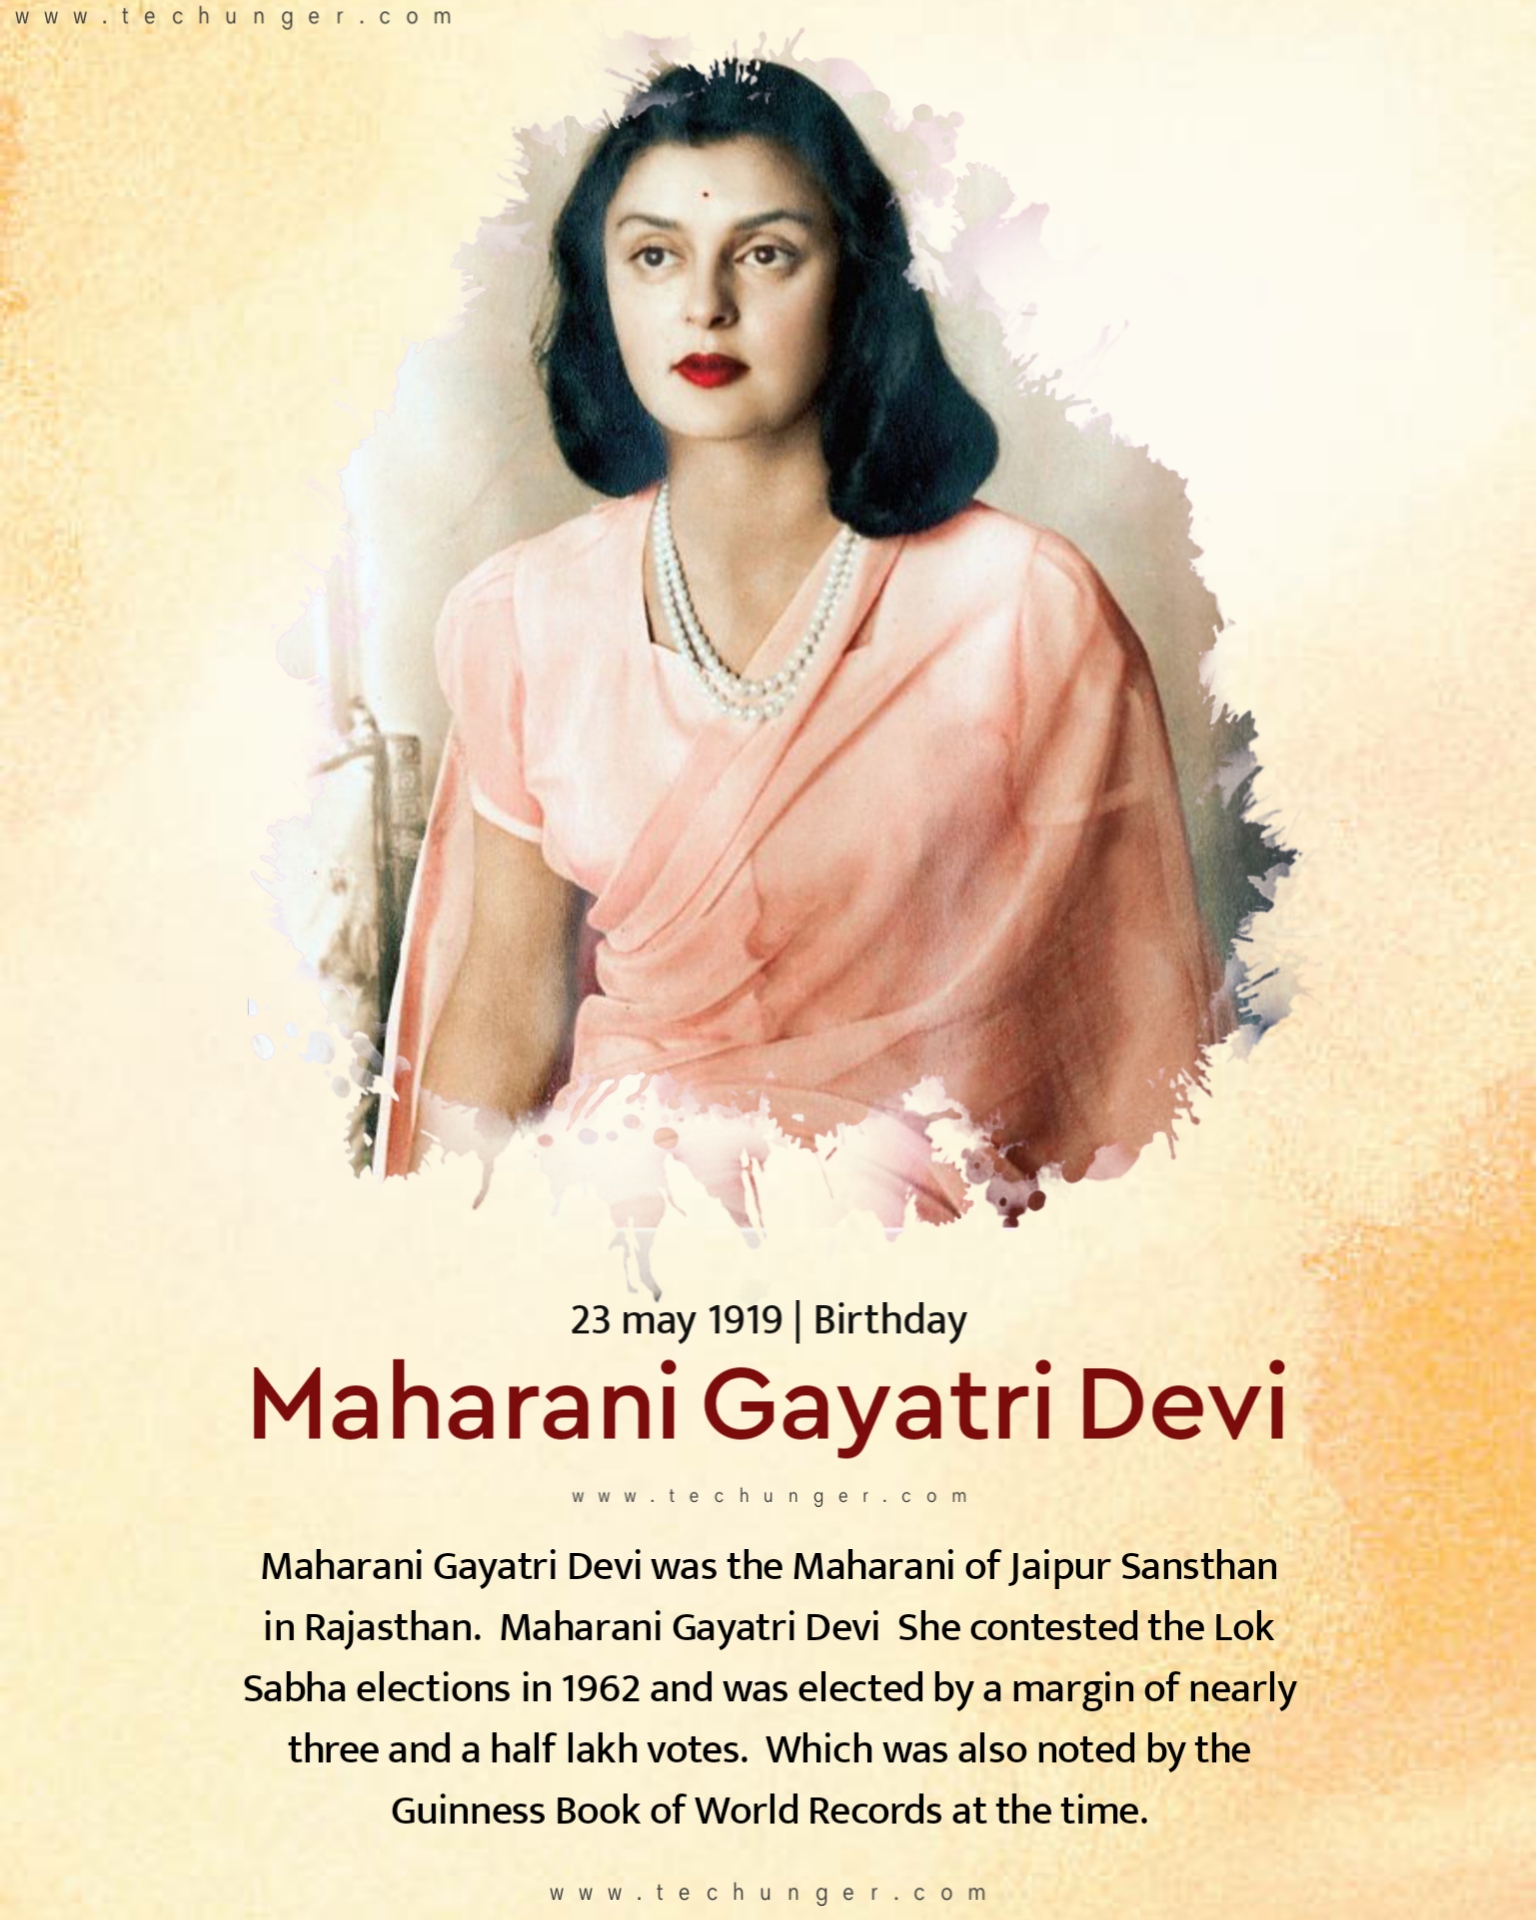 Maharani Gayatri Devi was the Maharani of Jaipur Sansthan in Rajasthan. Maharani Gayatri Devi She contested the Lok Sabha elections in 1962 and was elected by a margin of nearly three and a half lakh votes. Which was also noted by the Guinness Book of World Records at the time.